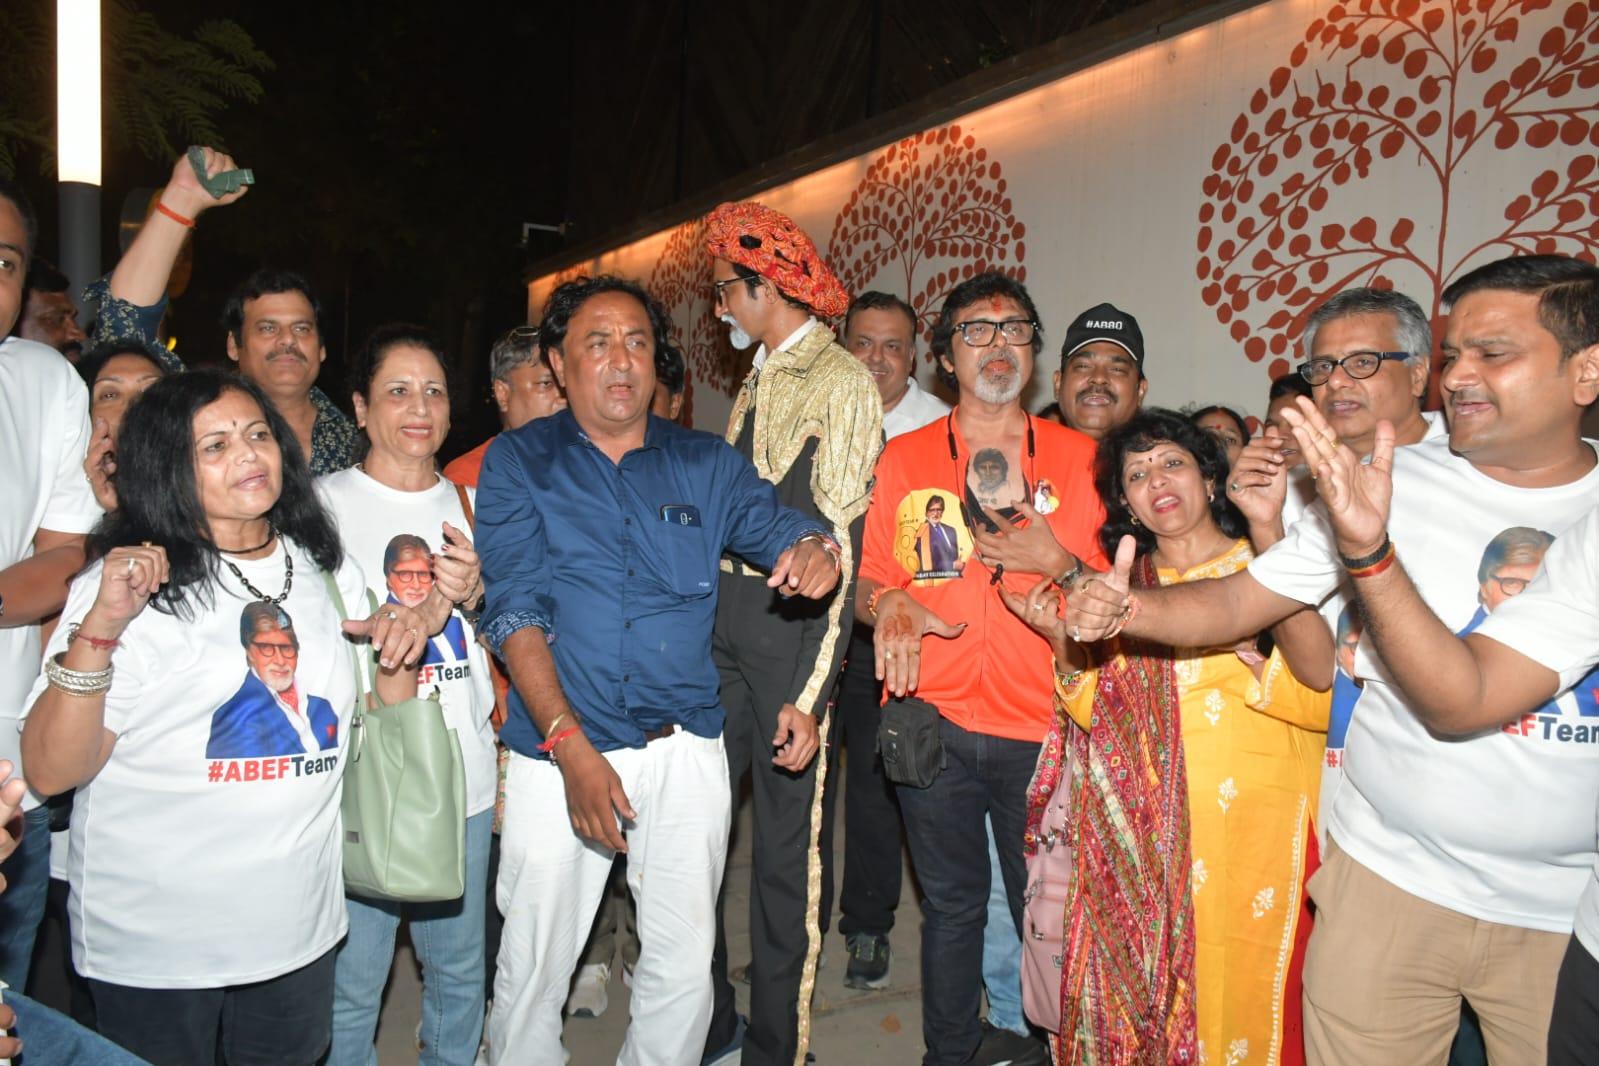 The celebrations were in full swing, with fans wearing T-shirts with Amitabh's face and chanting Big B's name. Some even dressed up like the man himself!